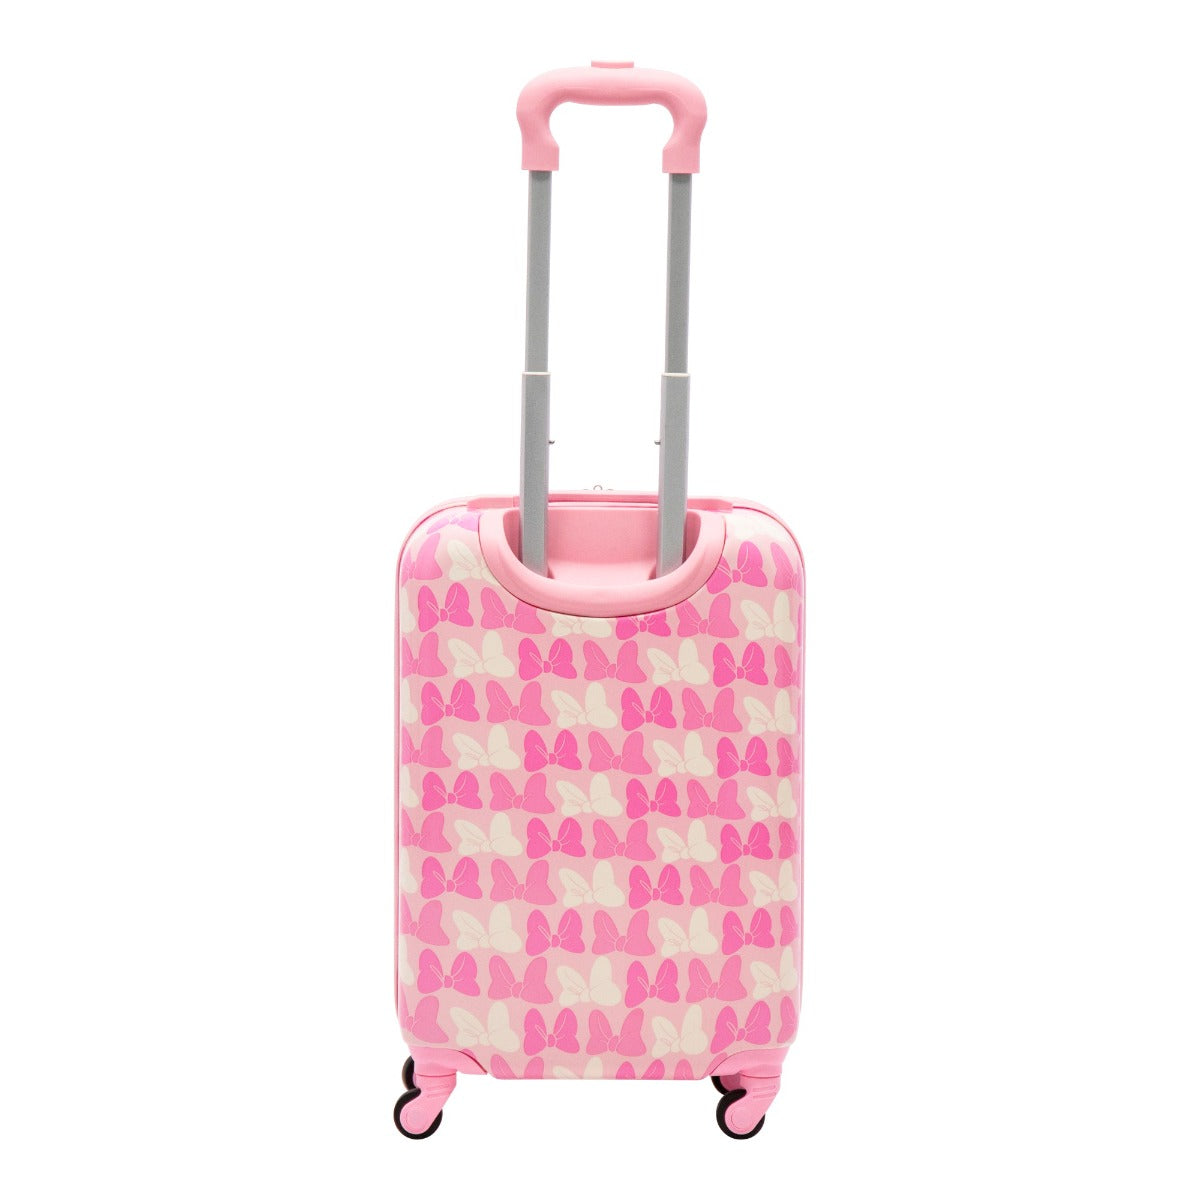 Ful Minnie Mouse Bows Print Hardside Spinner Suitcase - Pink Kids 20.5" Carry On Disney Luggage 